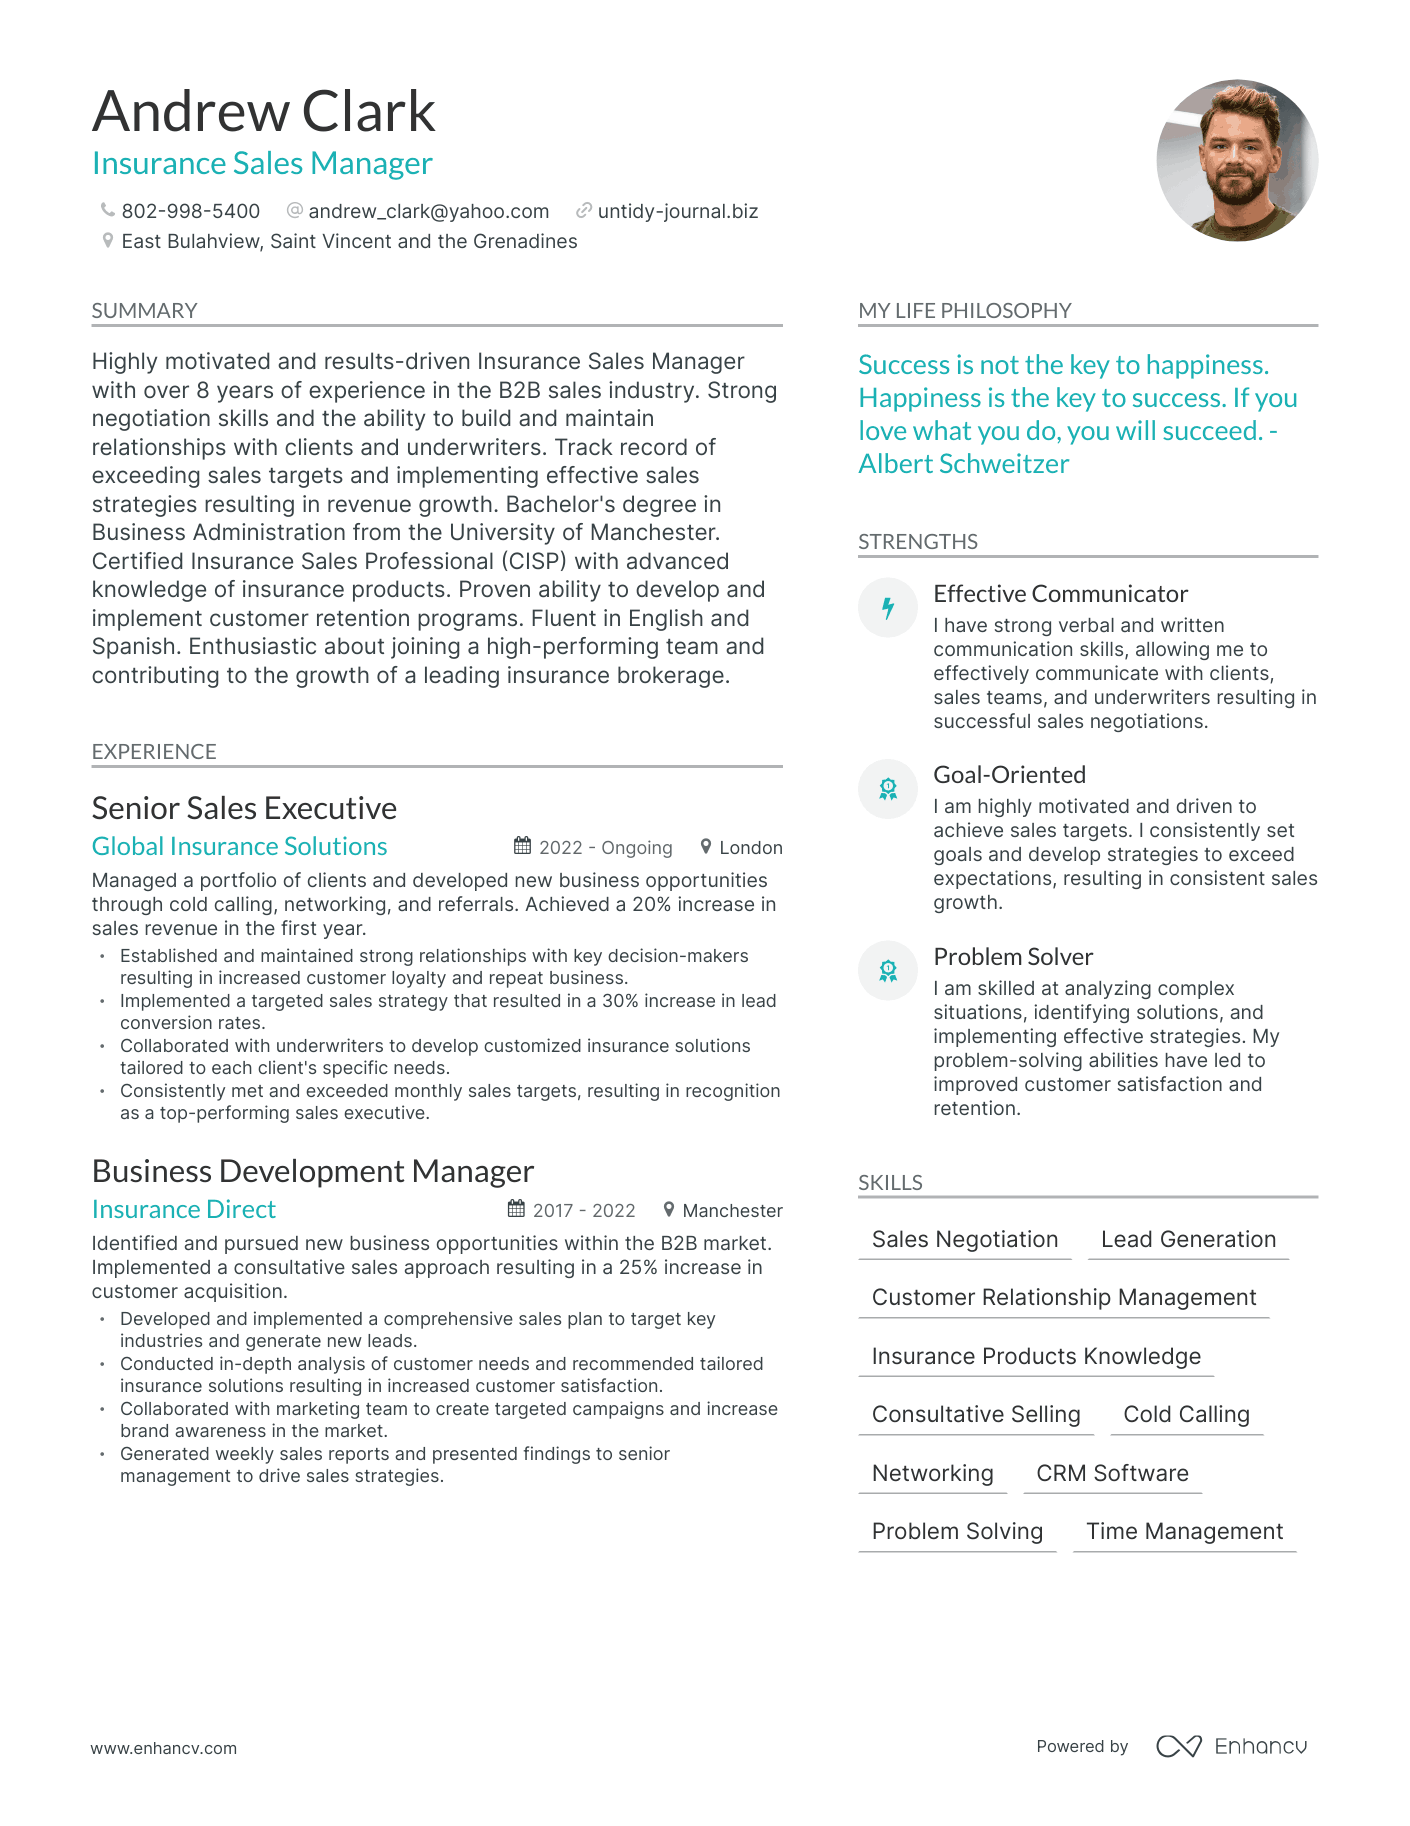 Insurance Sales Manager resume example